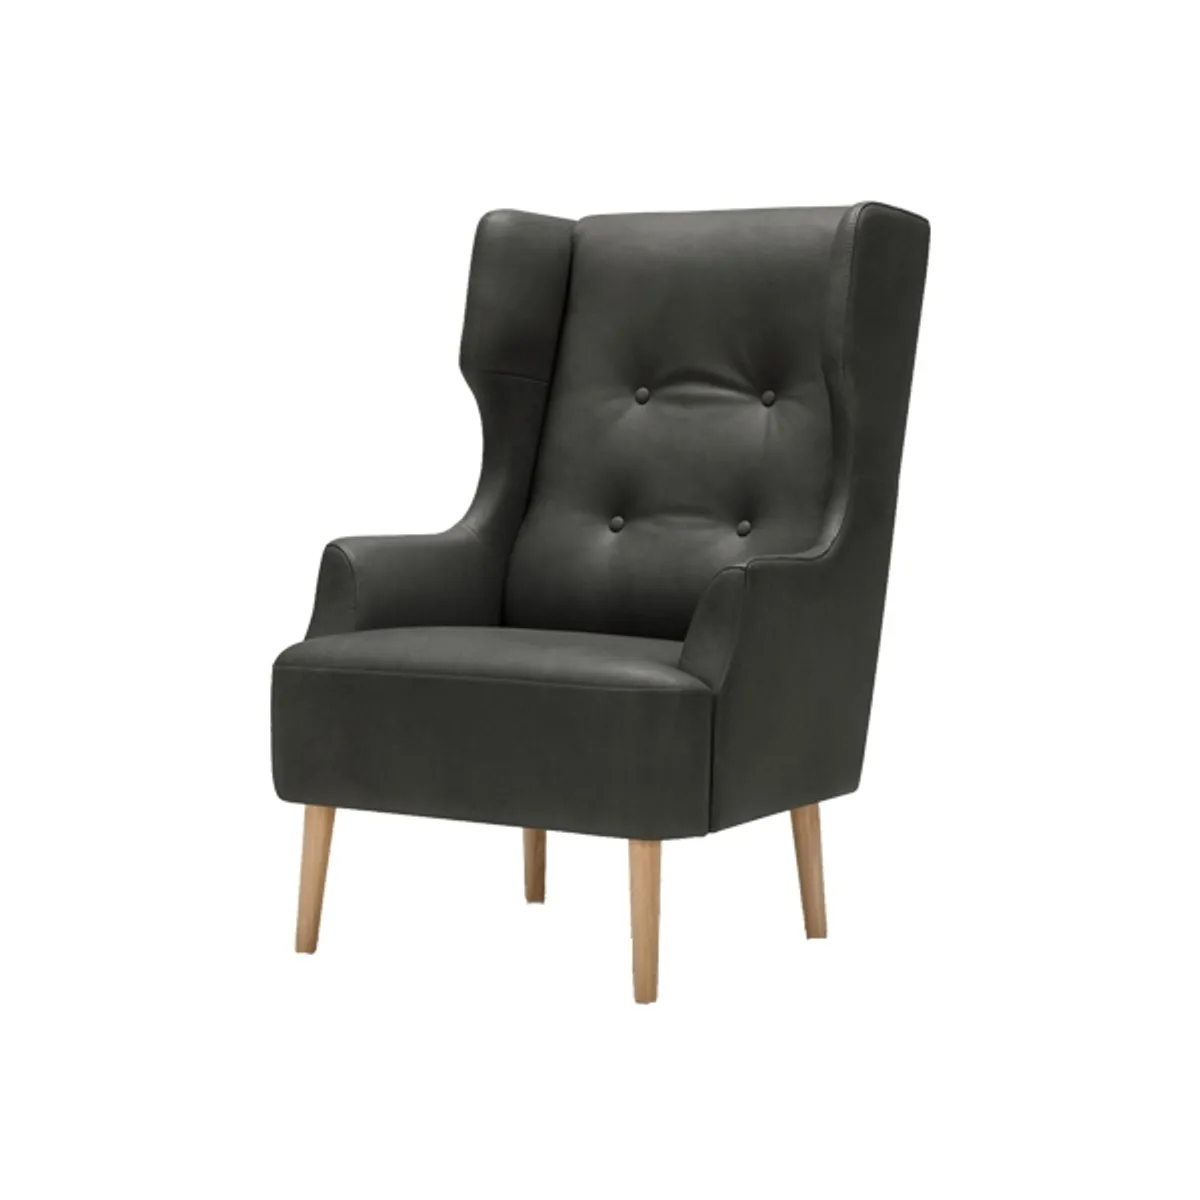 Sandrawingbackchair Inside Out Contracts